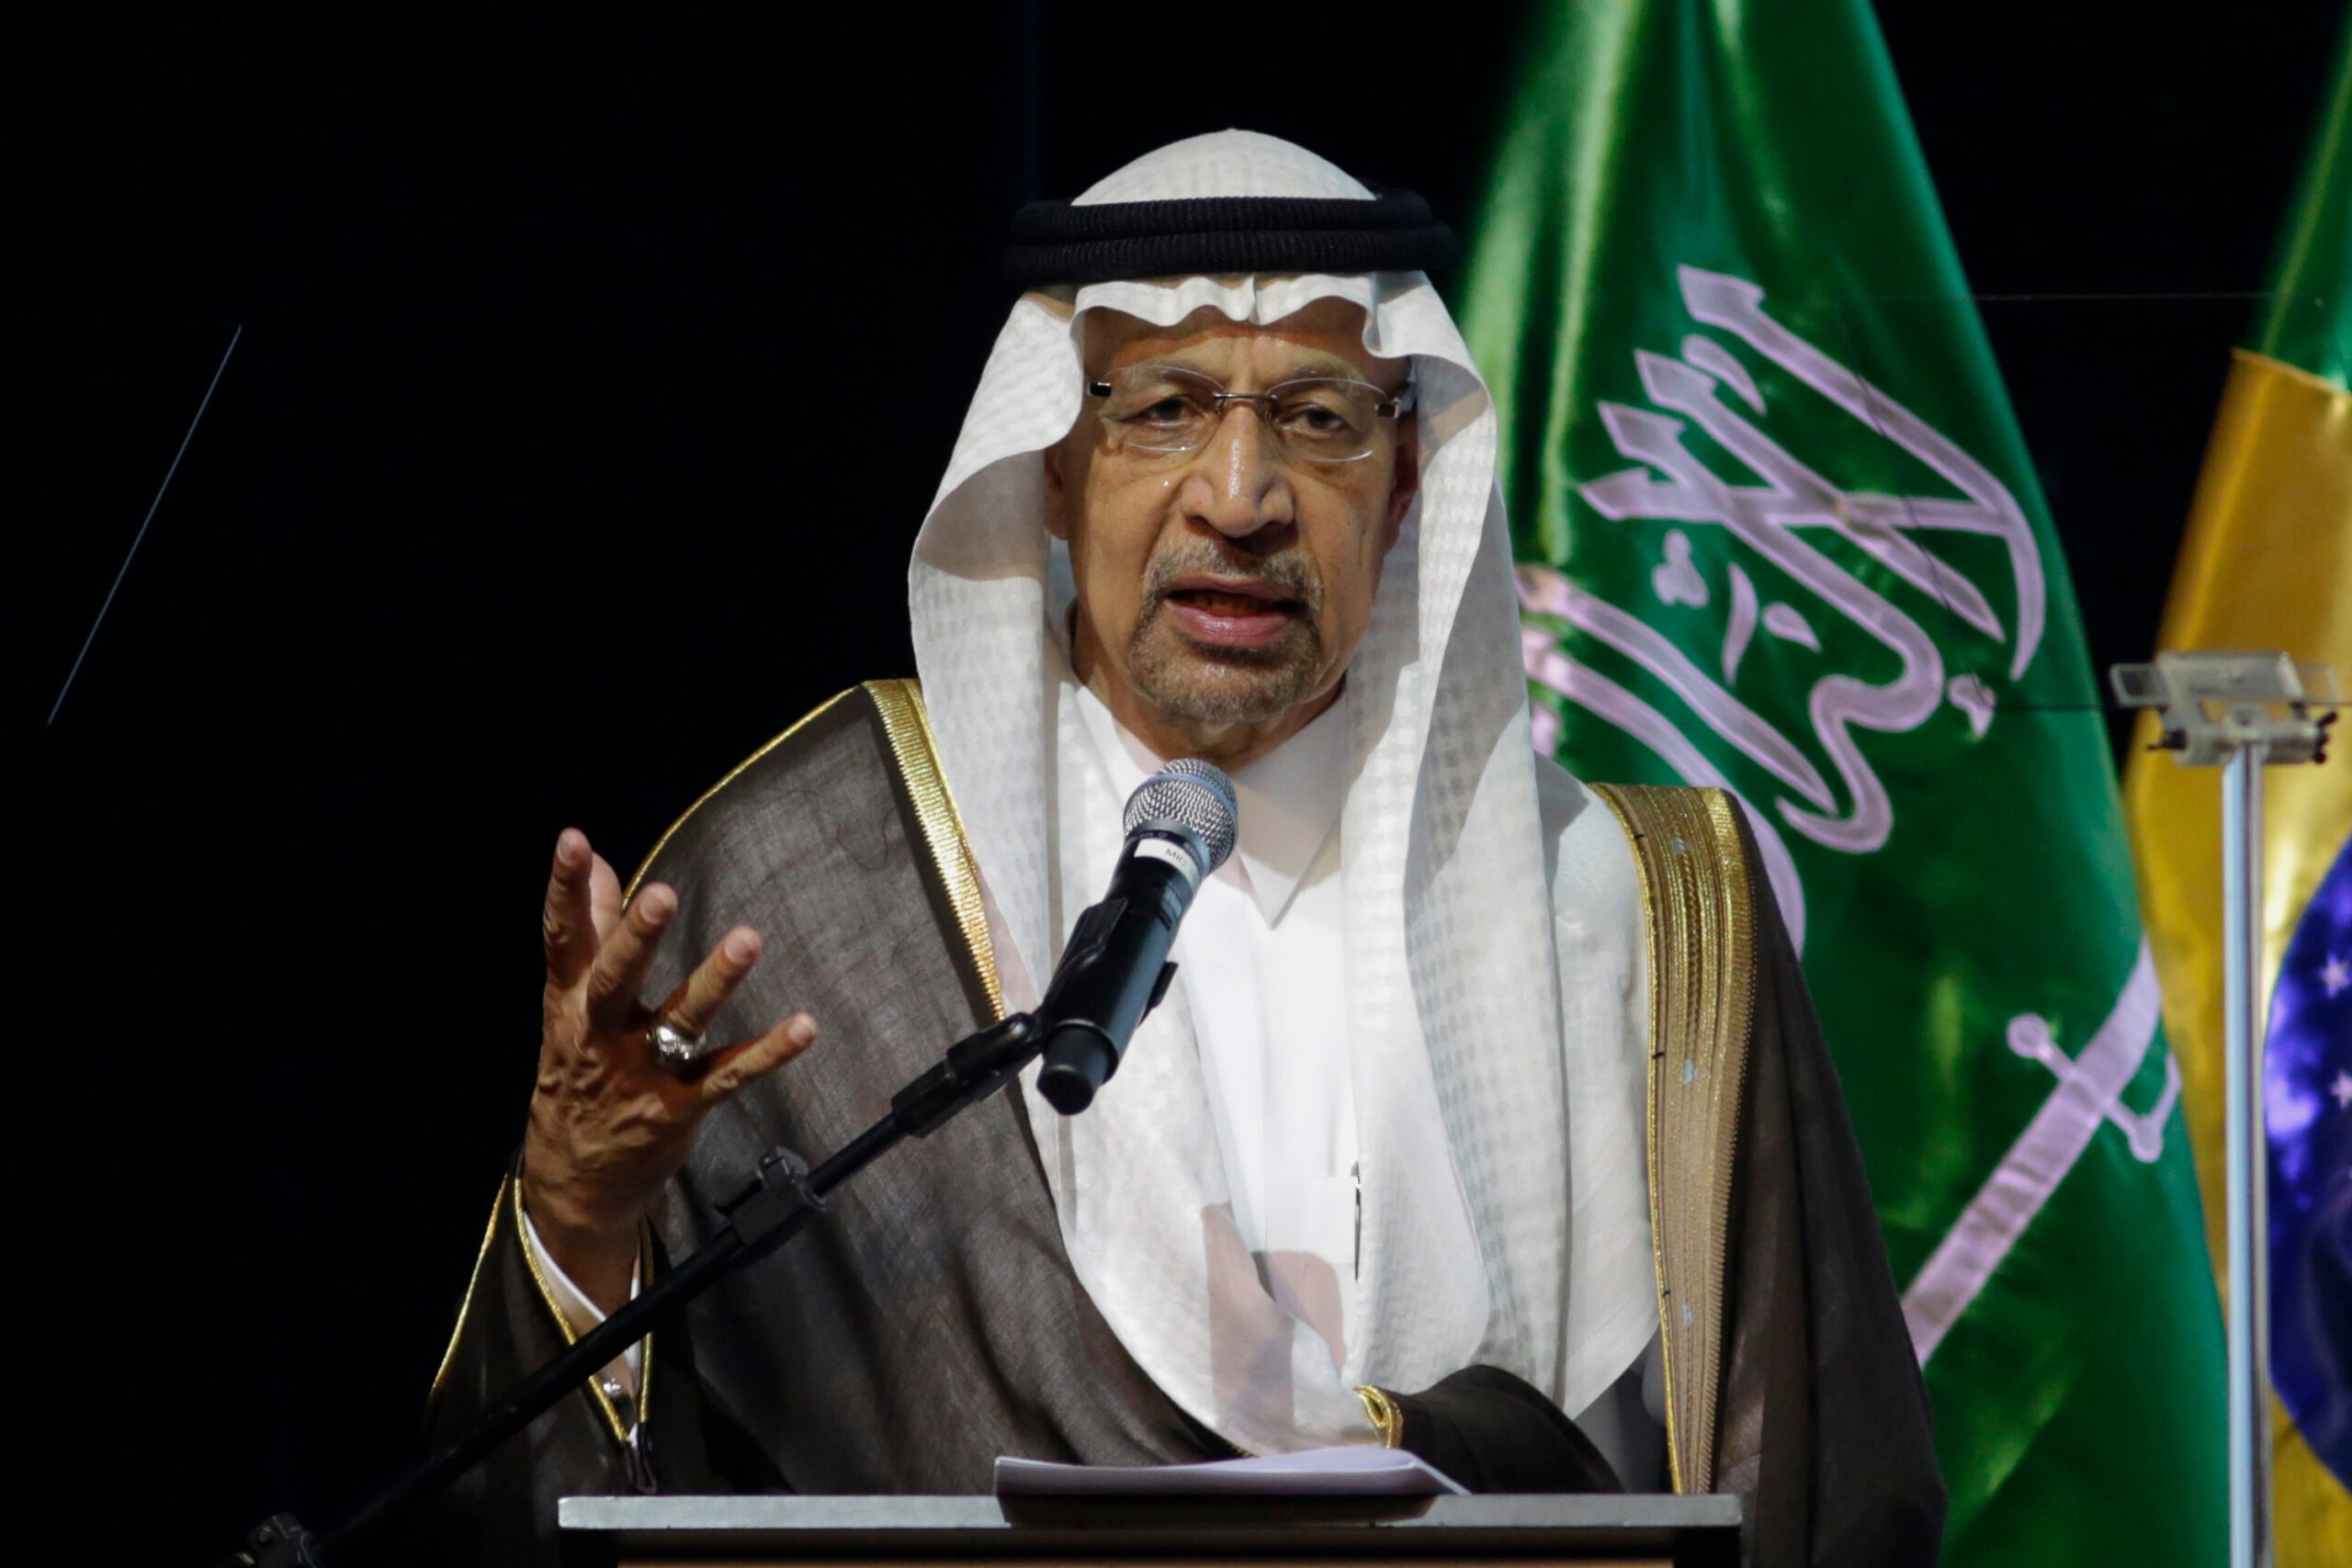 Saudi minister of investment Khalid al-Falih is head of Saudi Arabia's Economic Cities and Special Zones Authority